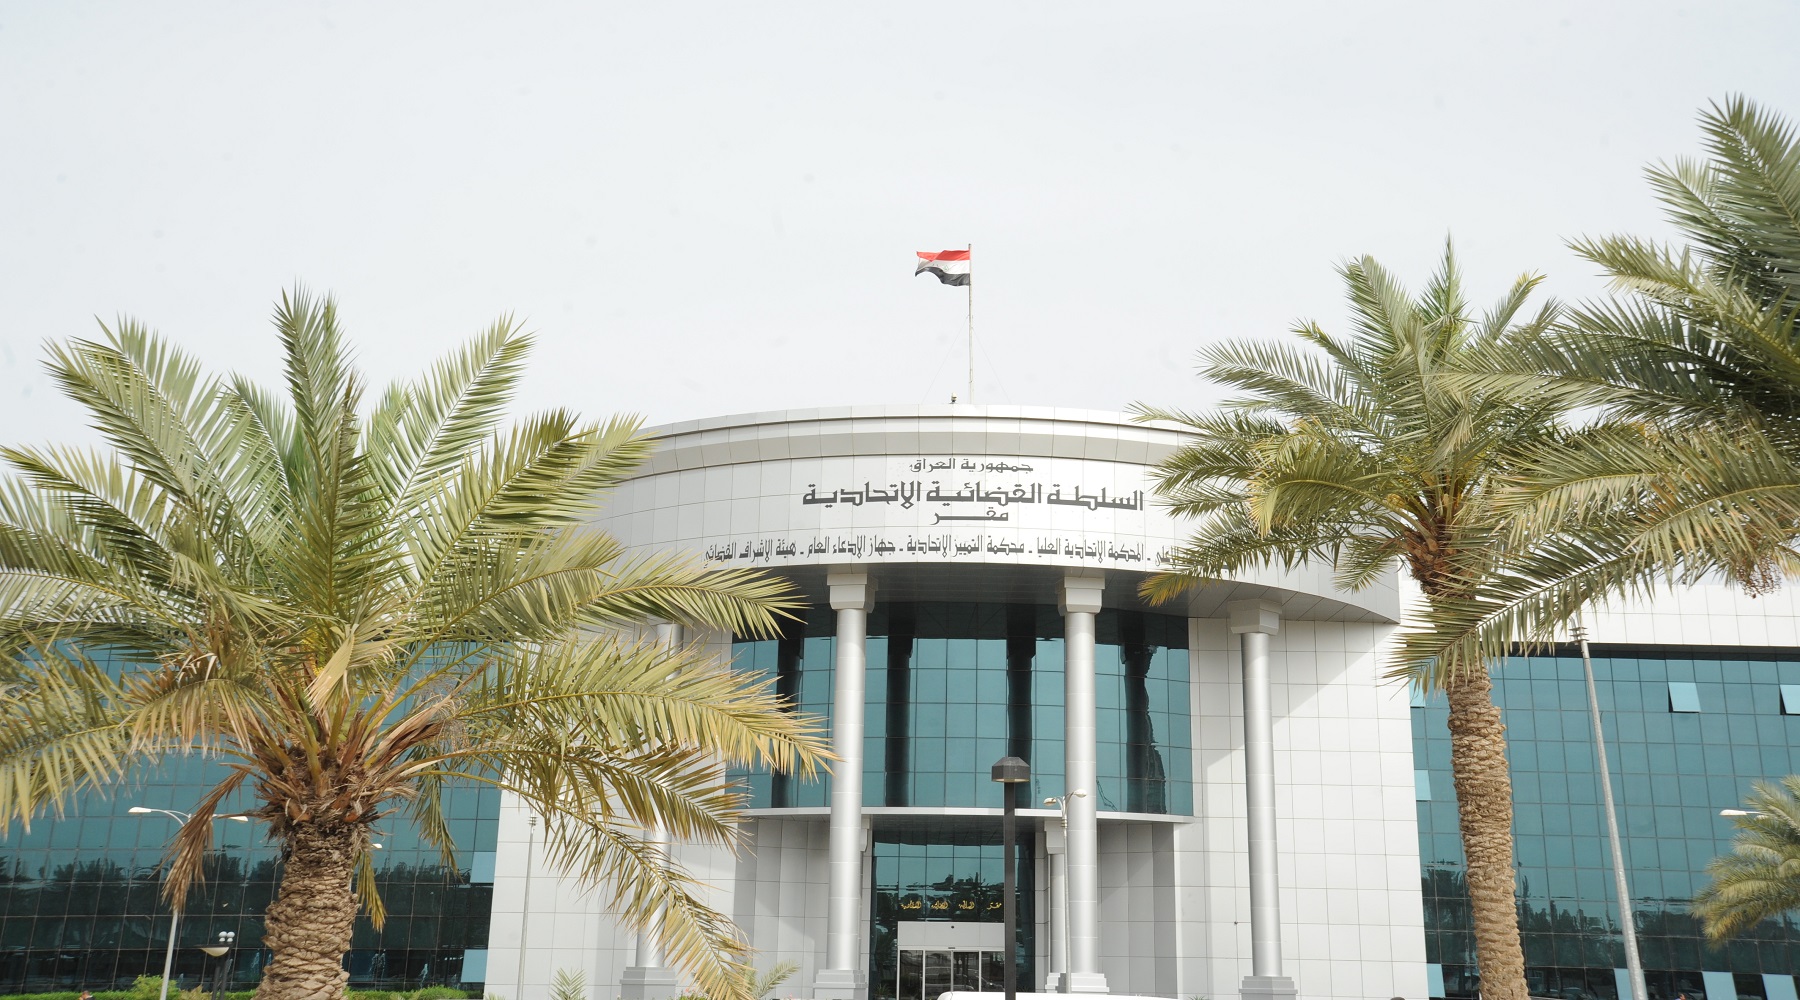 The Federal Supreme Court rules the invalidity and cancellation of the Diwani Order No. (29) of 2020 regarding the formation of an investigative committee in cases of corruption and important crimes.